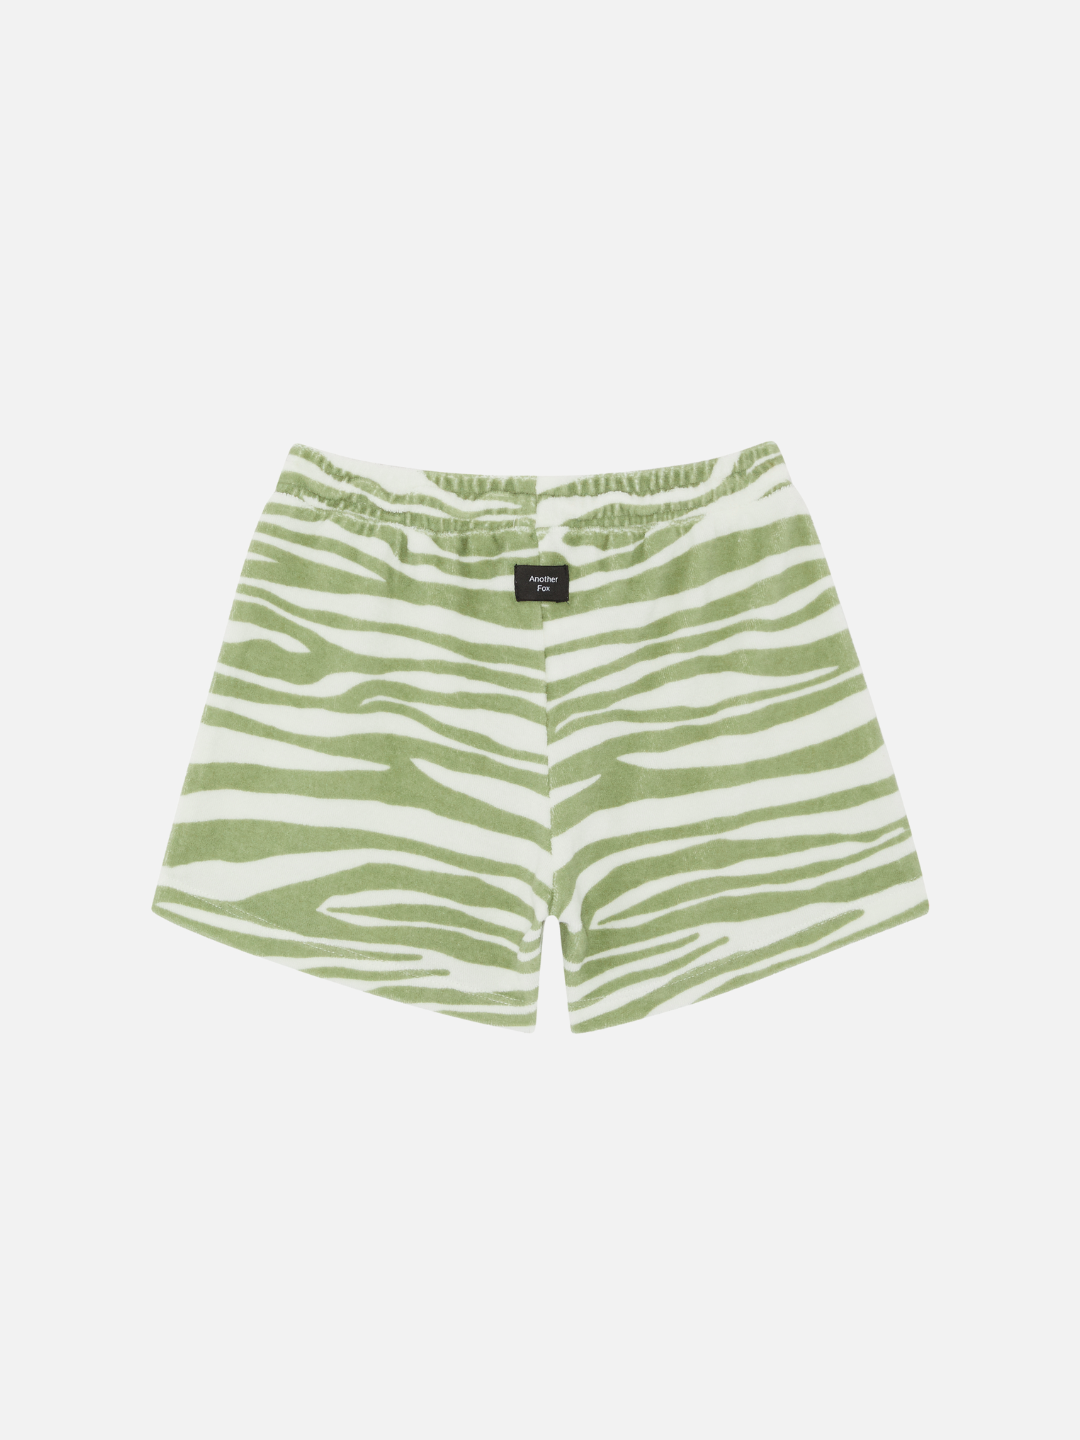 A back view of the kid's terry towel shorts in green tiger